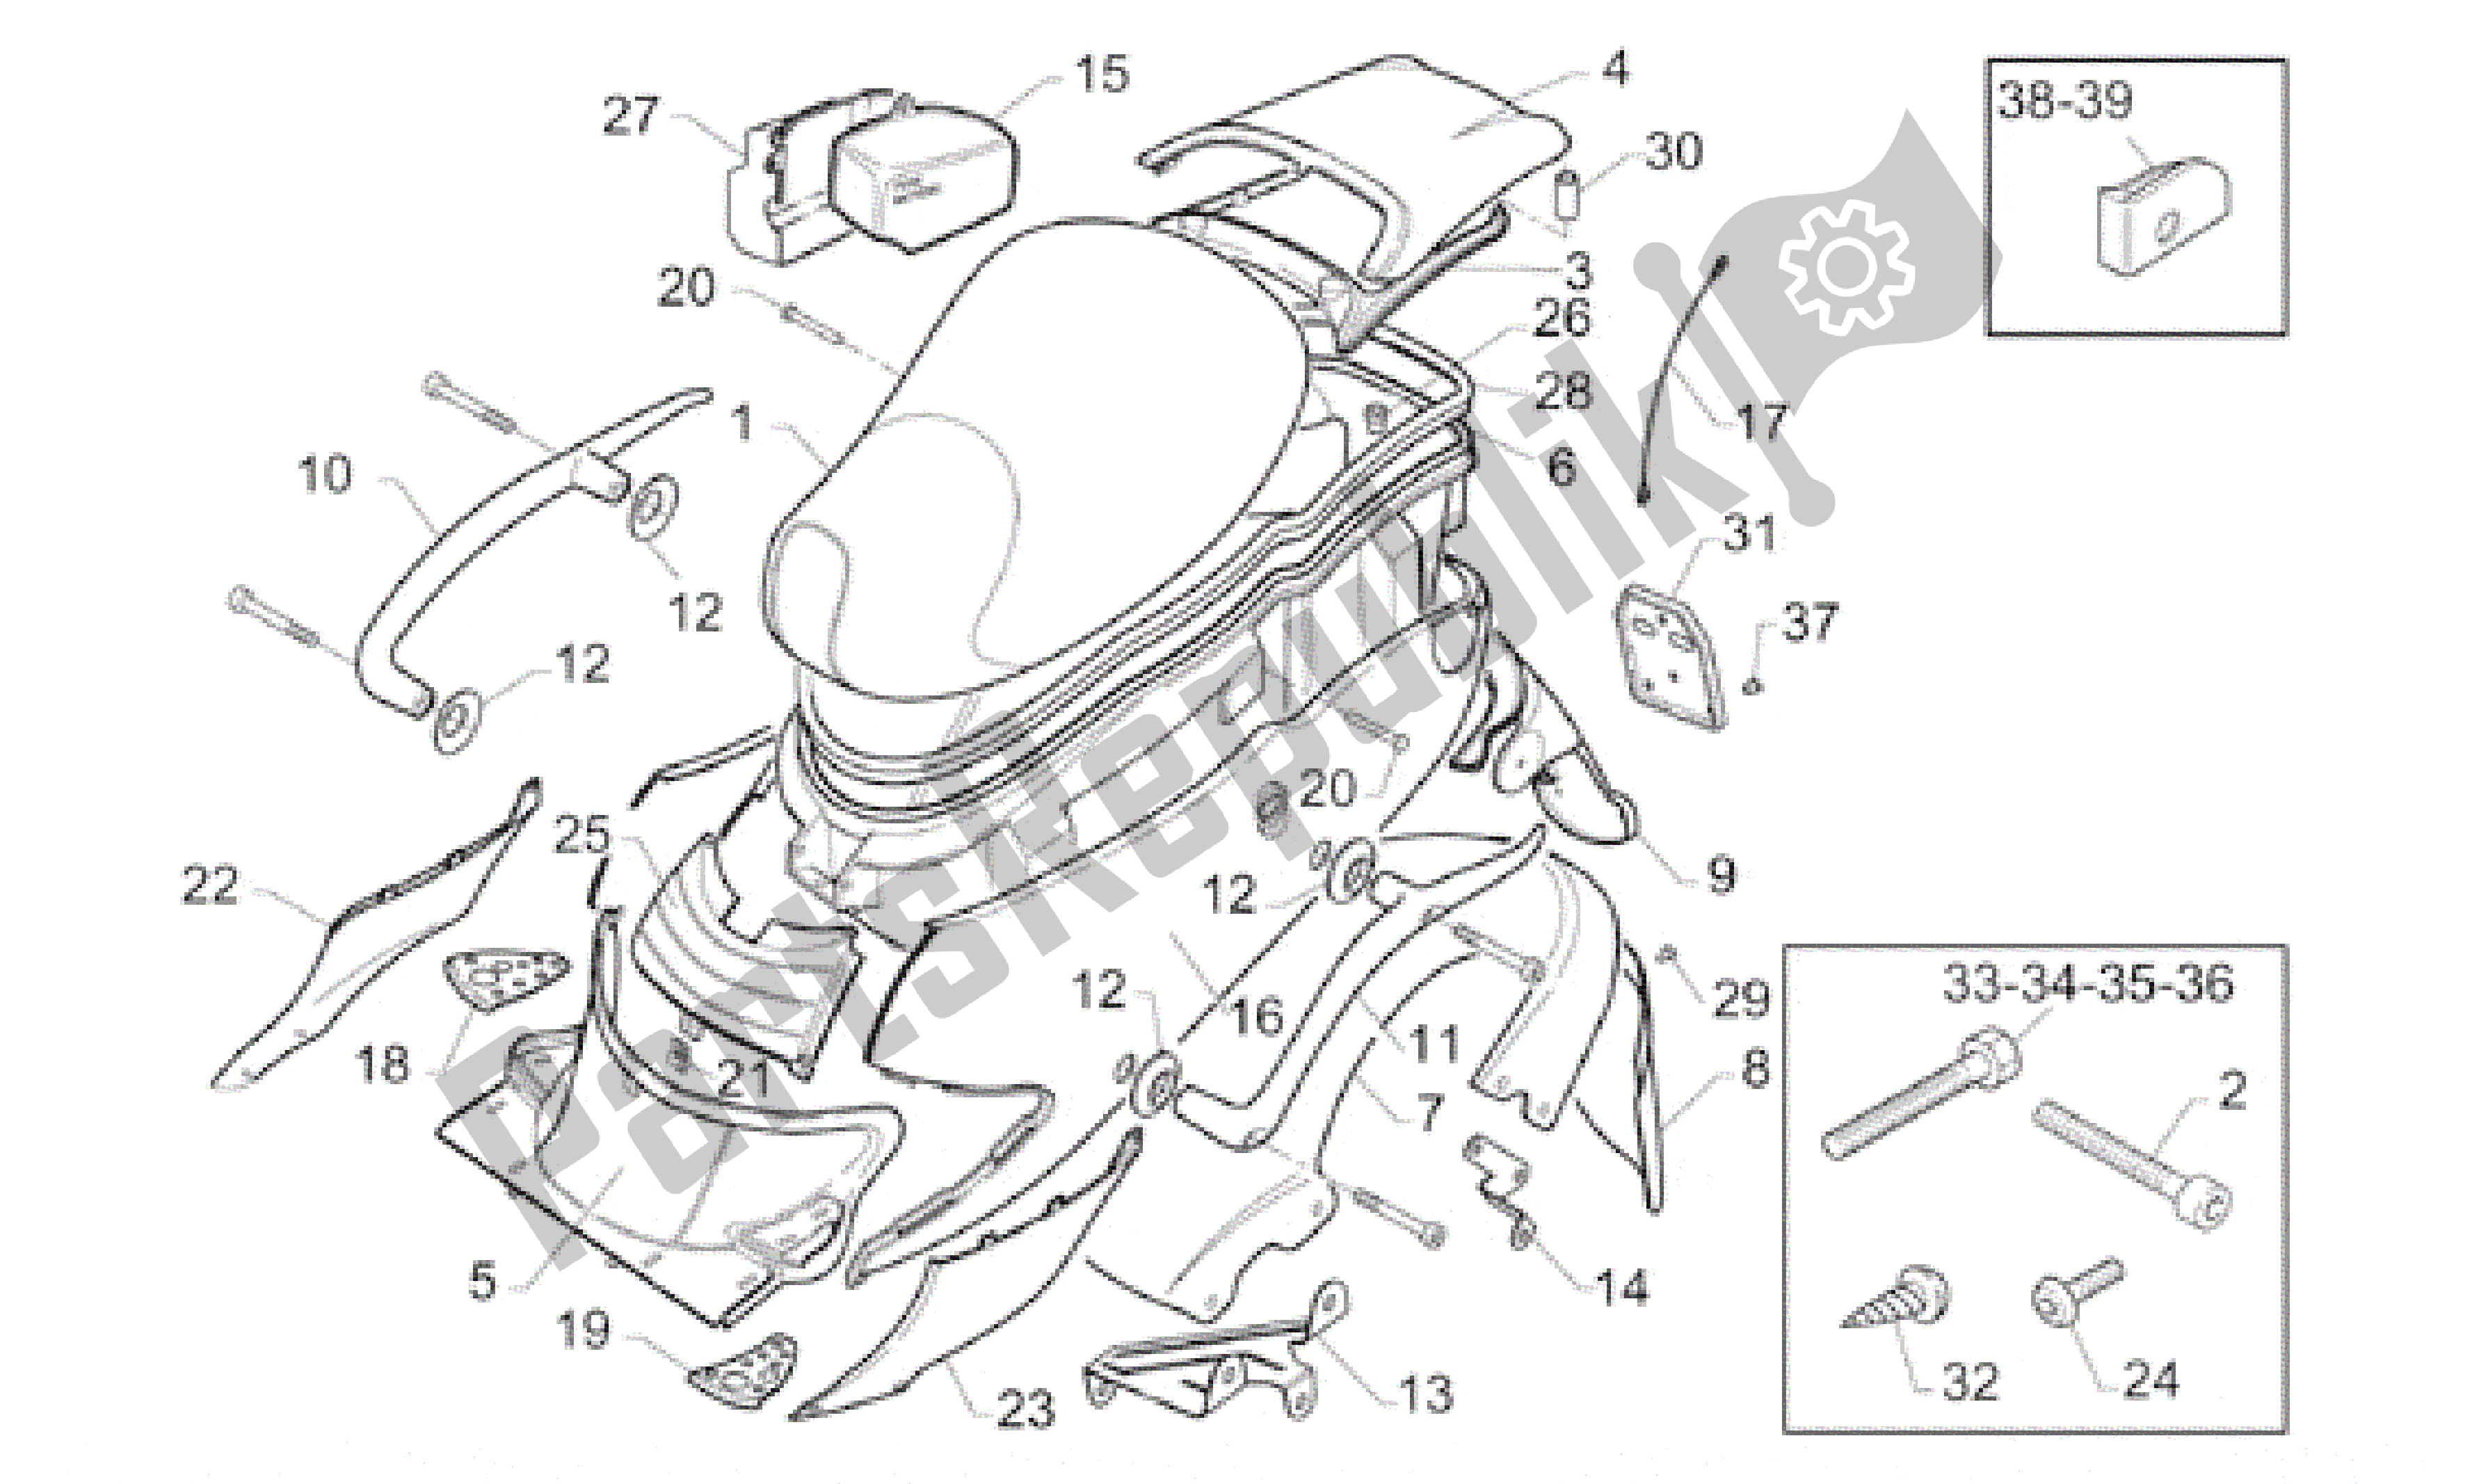 All parts for the Rear Body of the Aprilia Gulliver 50 1996 - 1998